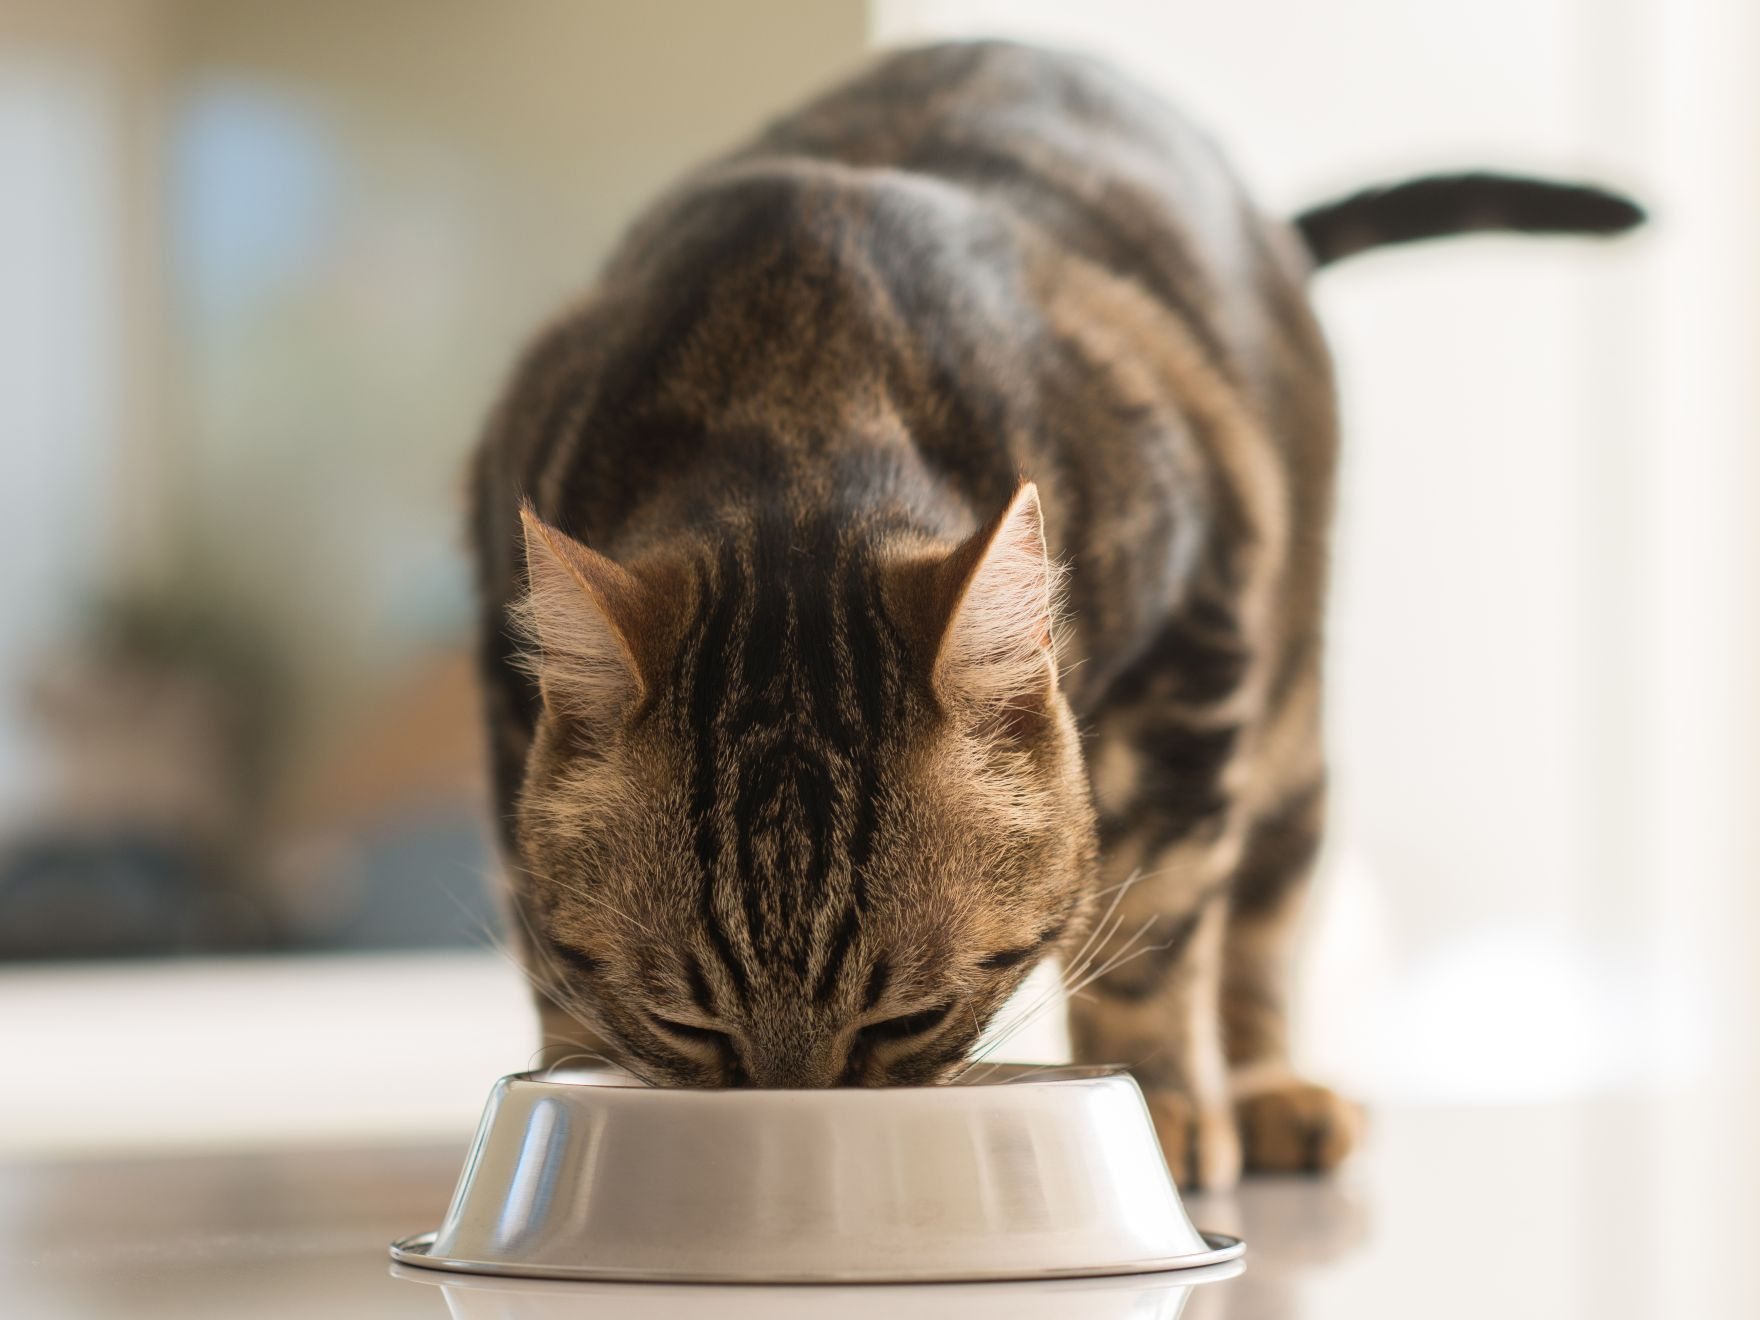 Brown cat standing up and eating from a silver cat food bowl